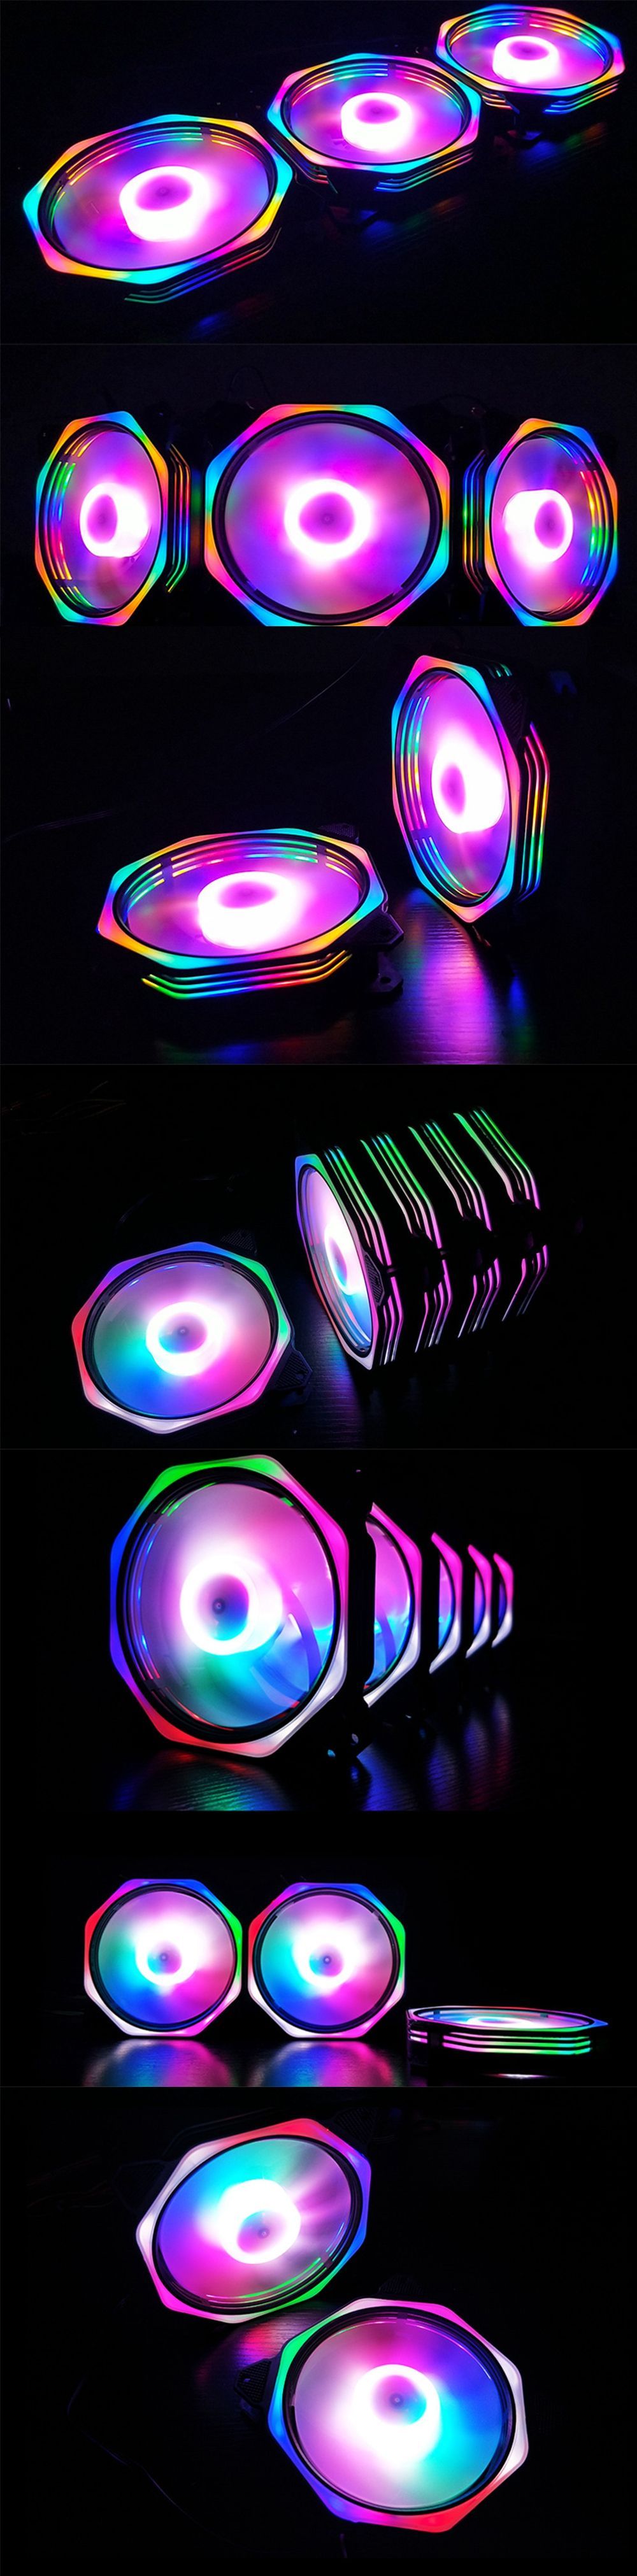 Coolmoon-120mm-Adjustable-RGB-LED-Light-CPU-Cooling-Fan-Mute-Octagon-Computer-PC-Case-Cooling-Fan-1582520